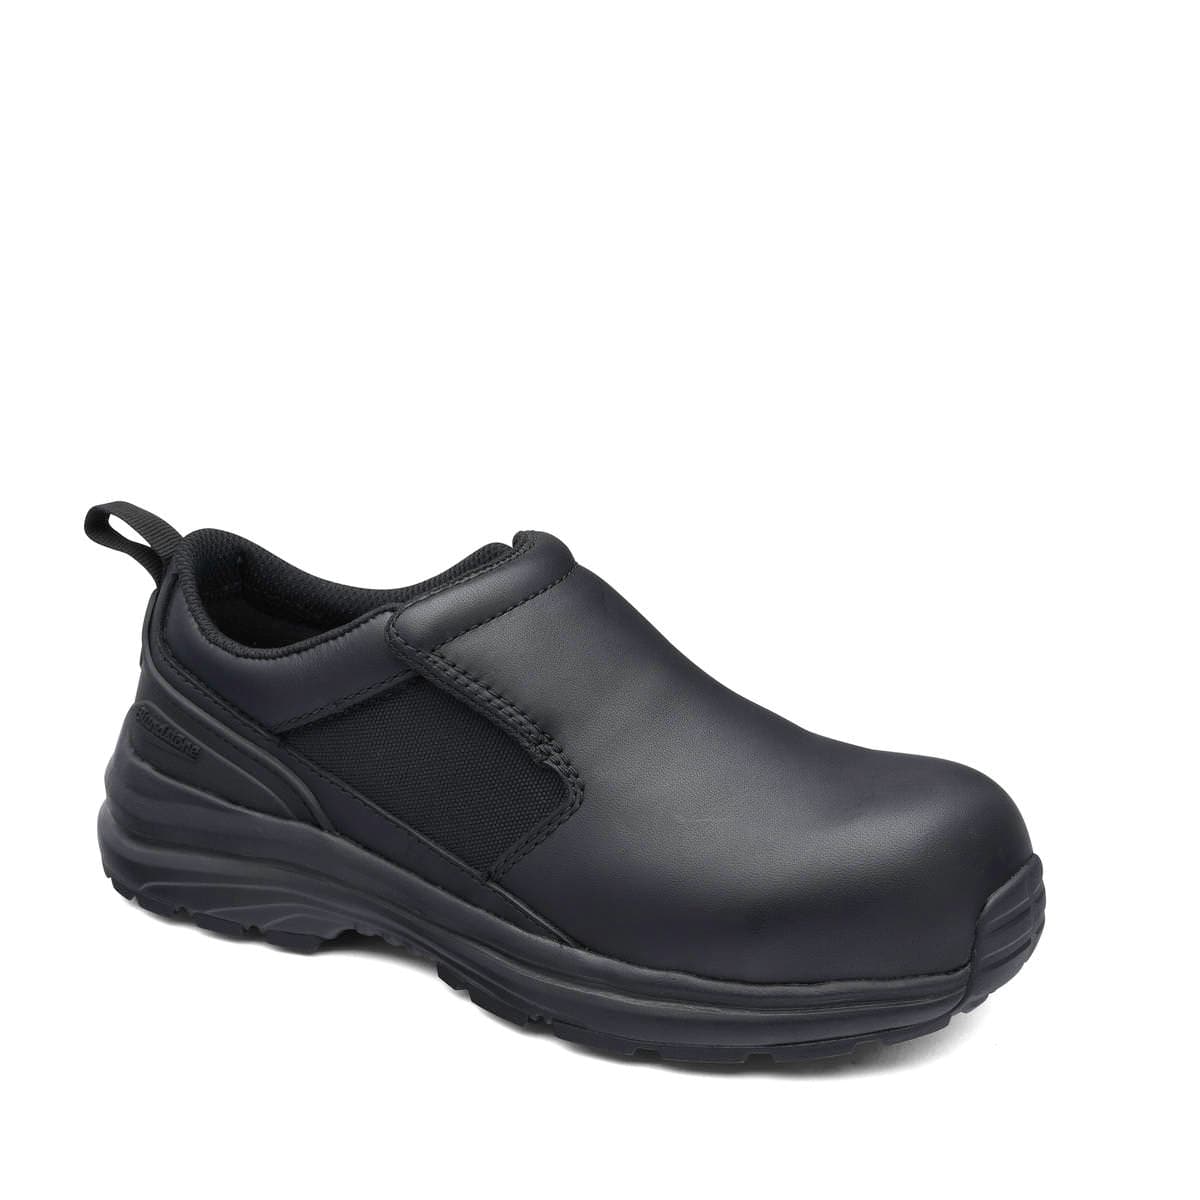 Blundstone Women's Safety Series - Slip on Safety Shoes - Black #886